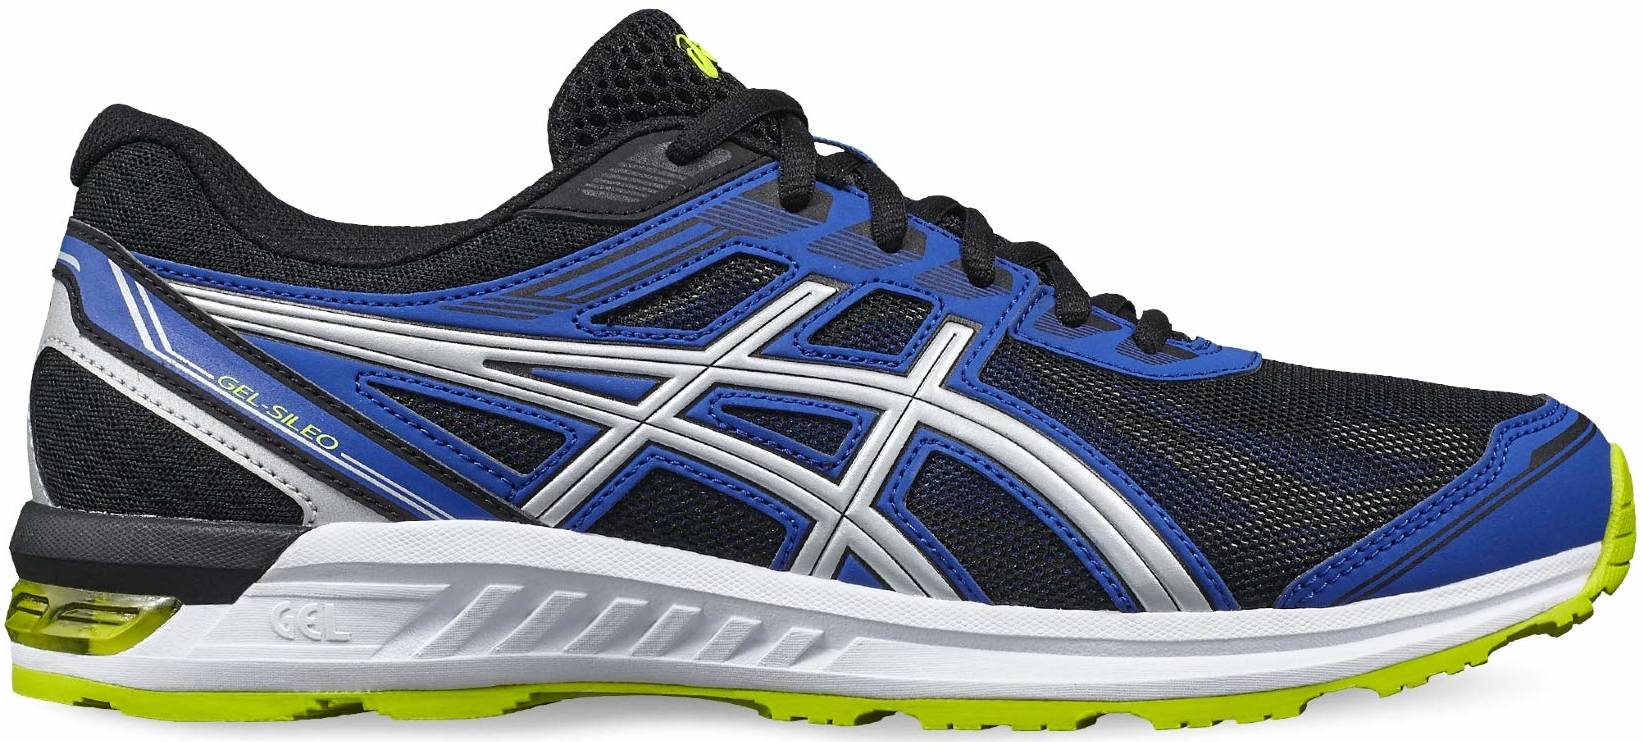 Only £30 + Review of Asics Gel Sileo | RunRepeat